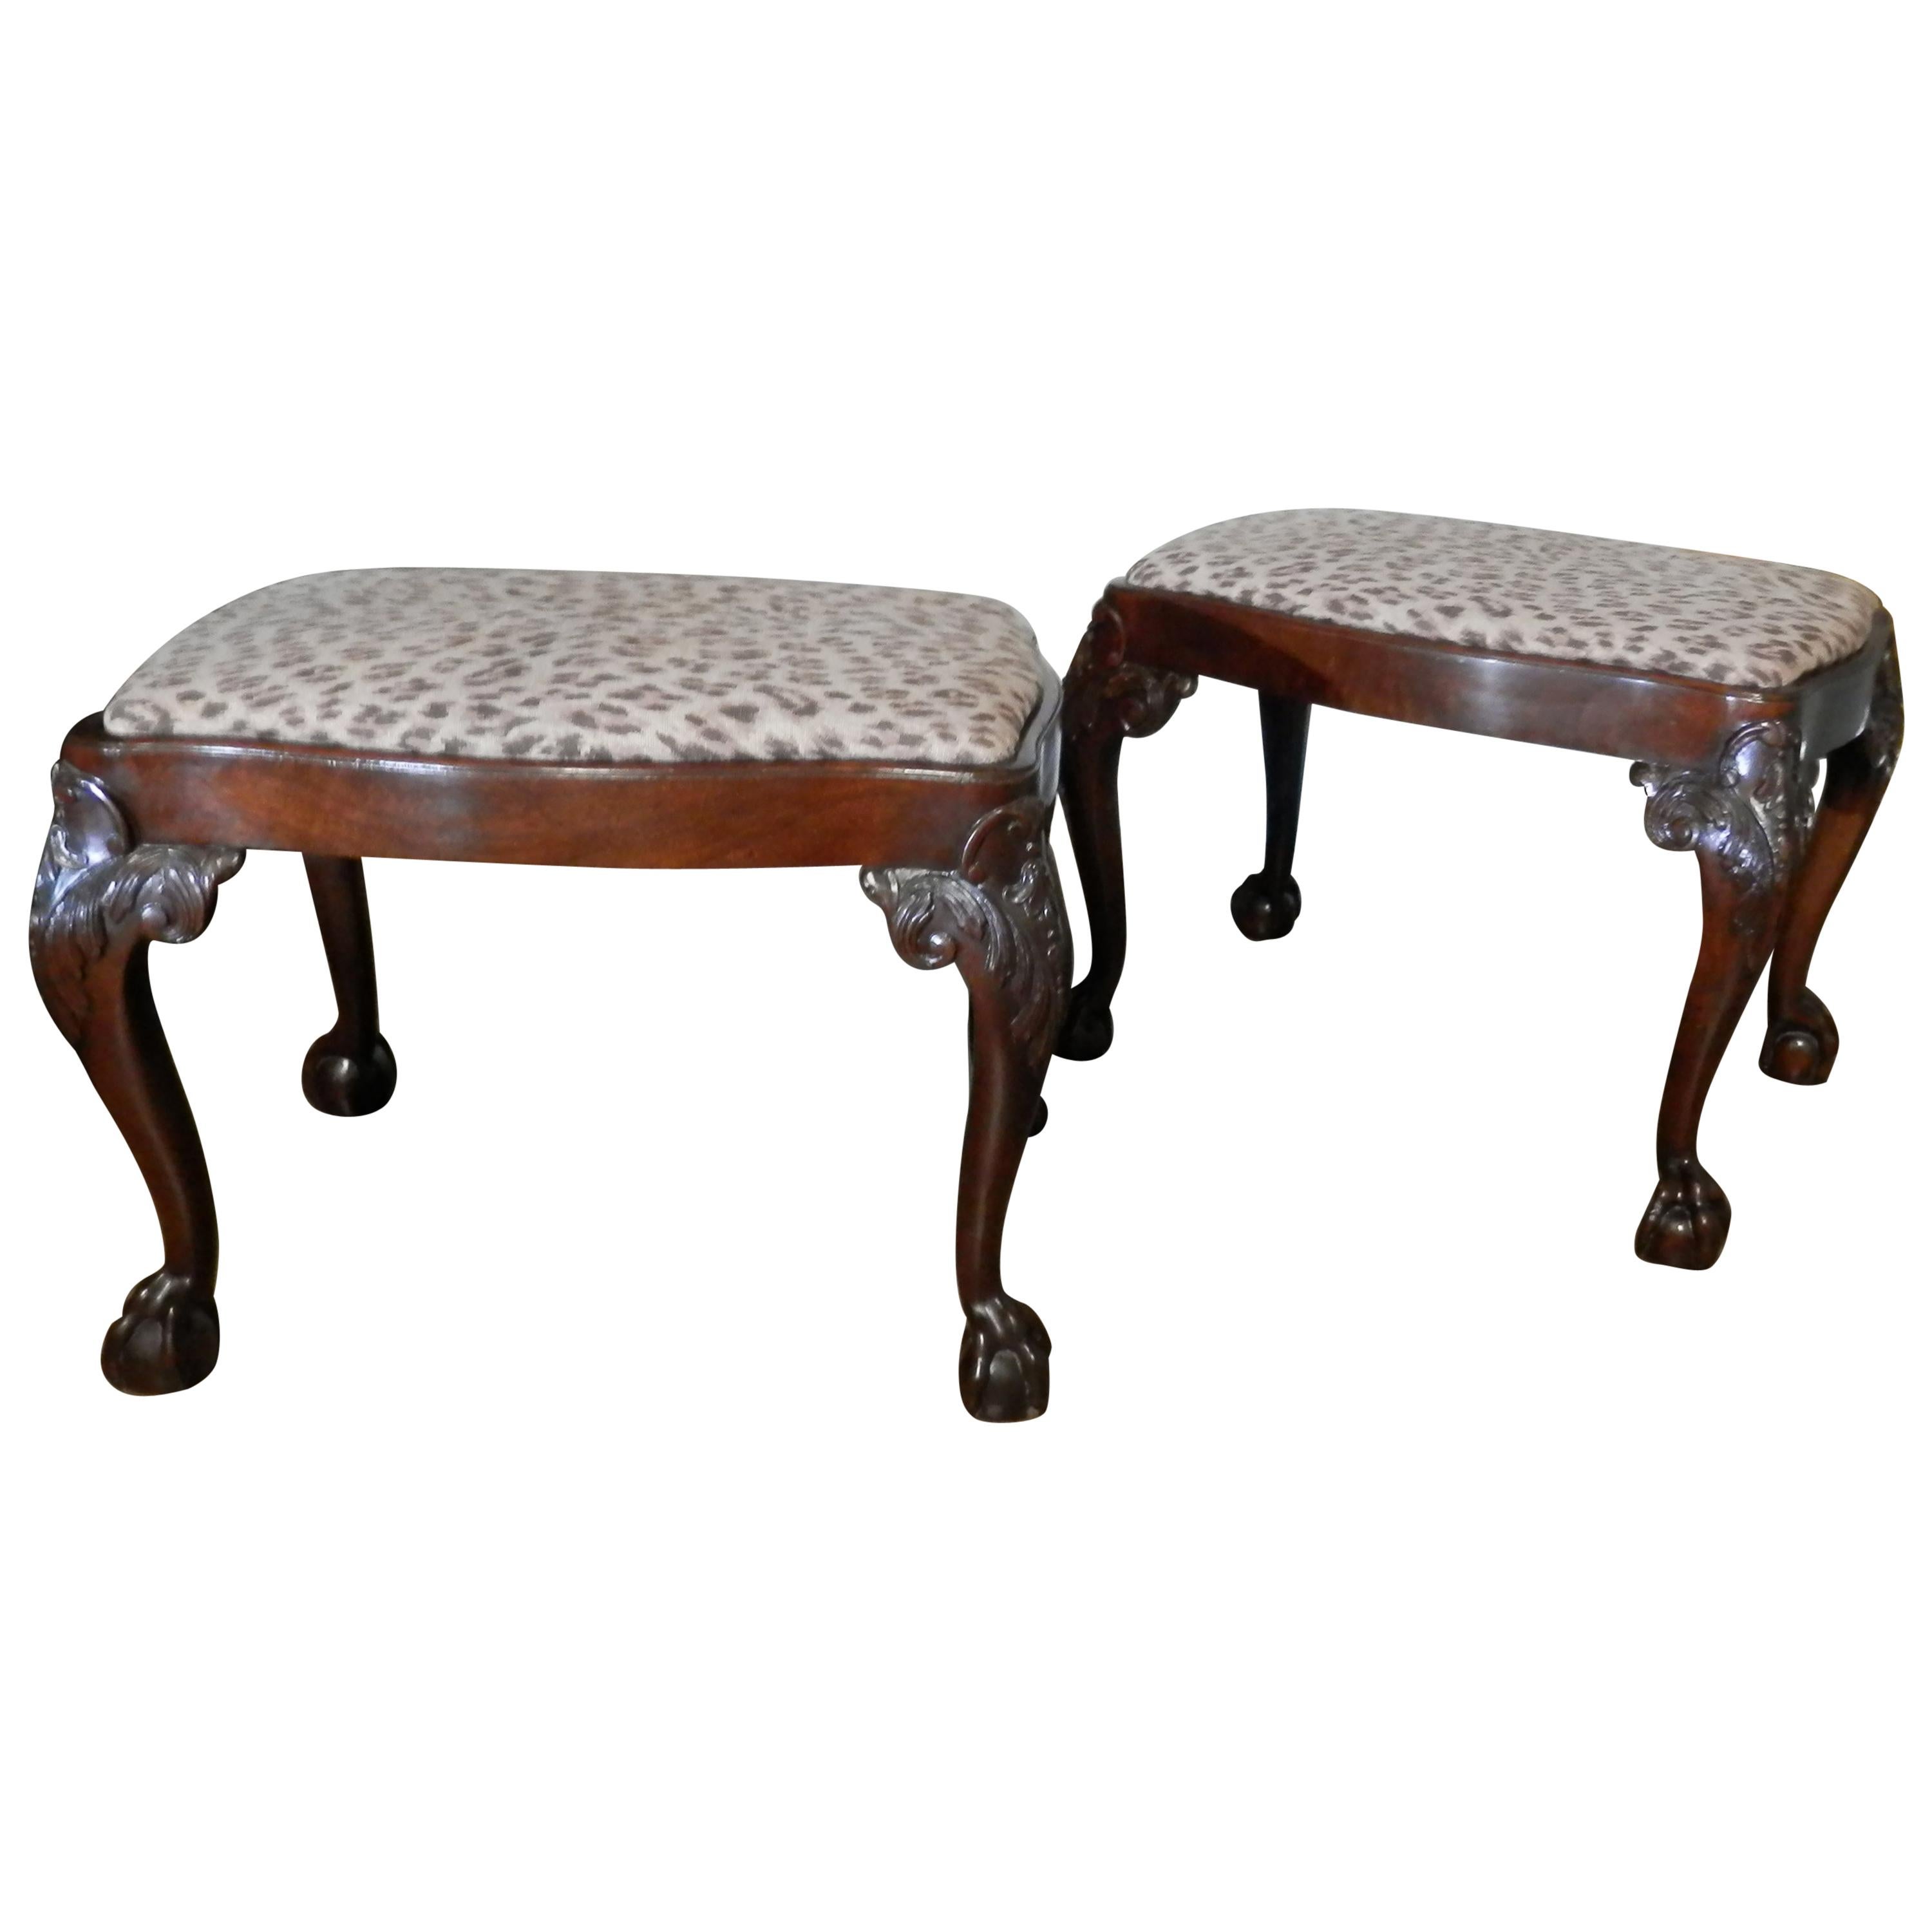 Pair of Late 19th Century English Chippendale Mahogany Benches For Sale